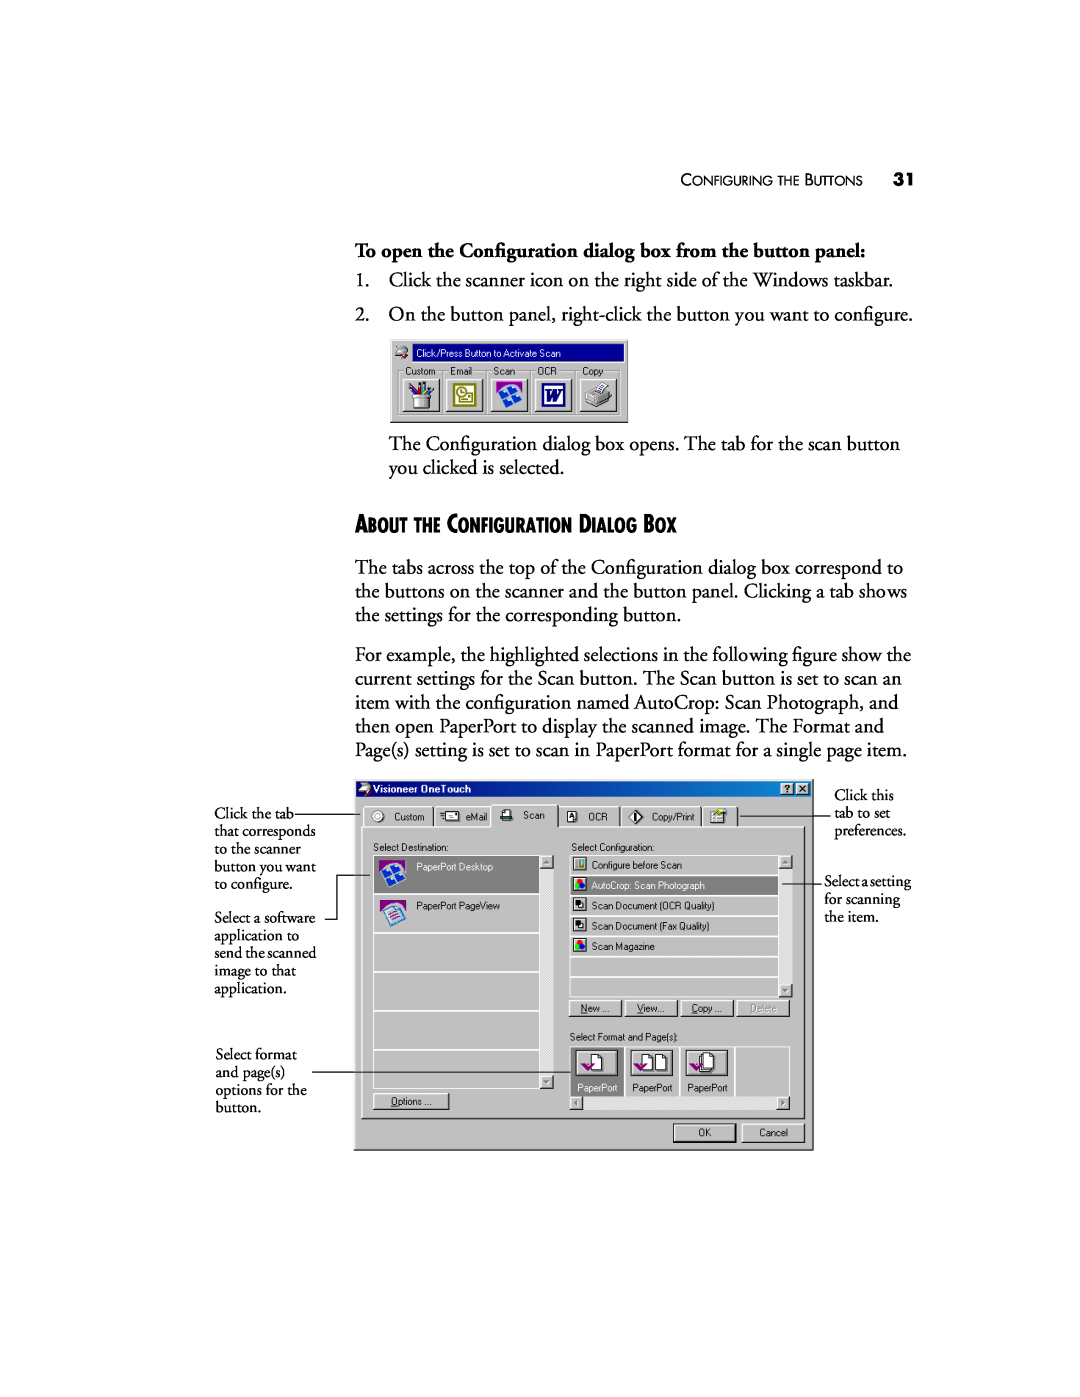 Visioneer 9320 manual About The Configuration Dialog Box, To open the Conﬁguration dialog box from the button panel 